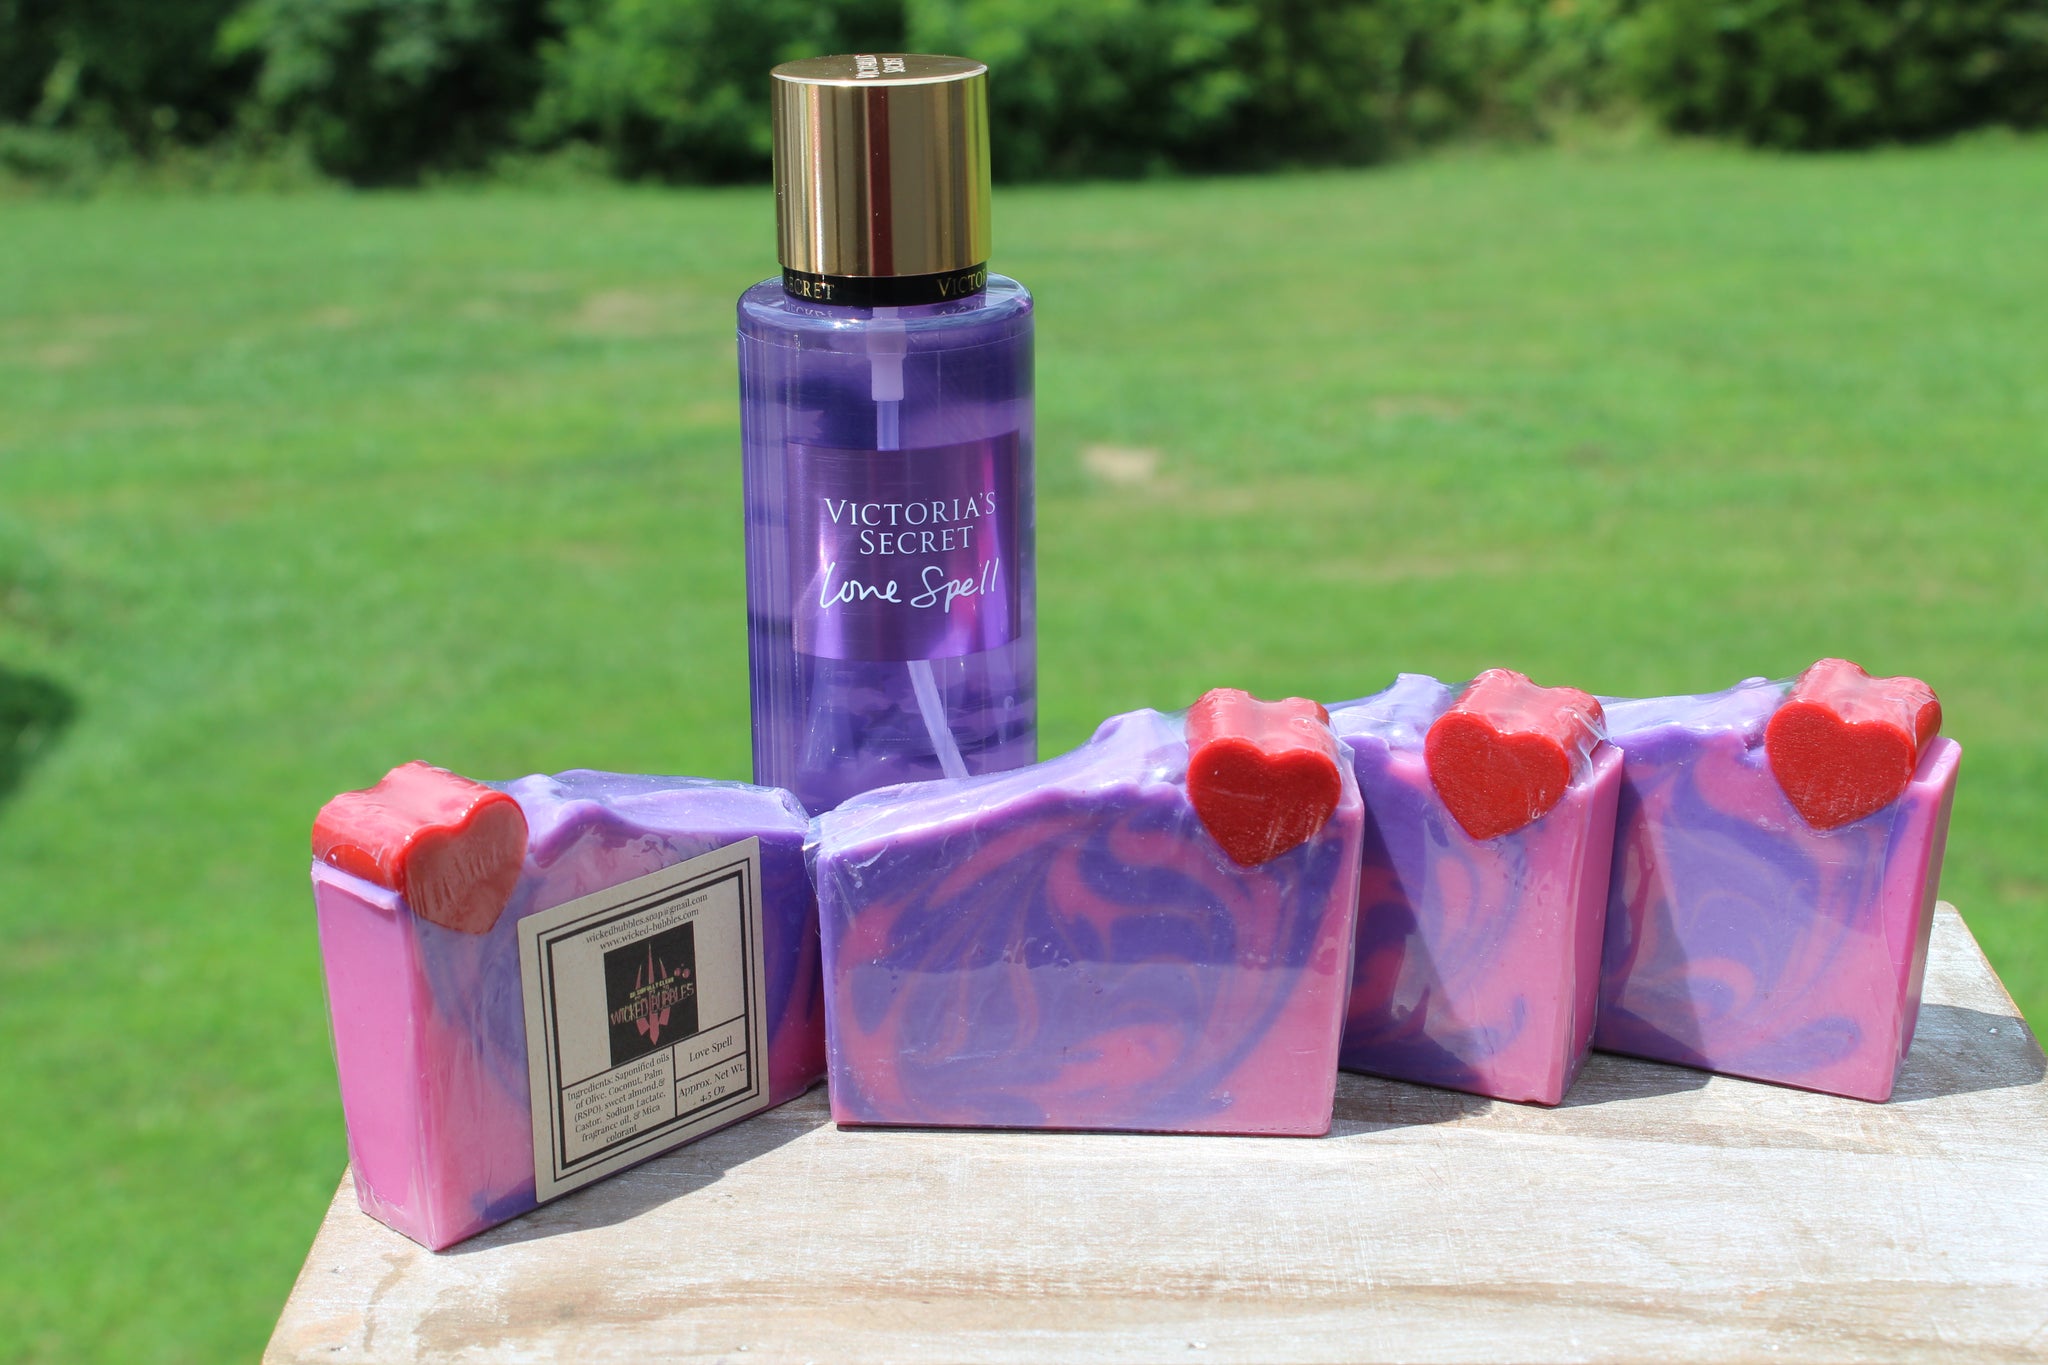 Spell On You Perfume Dupe